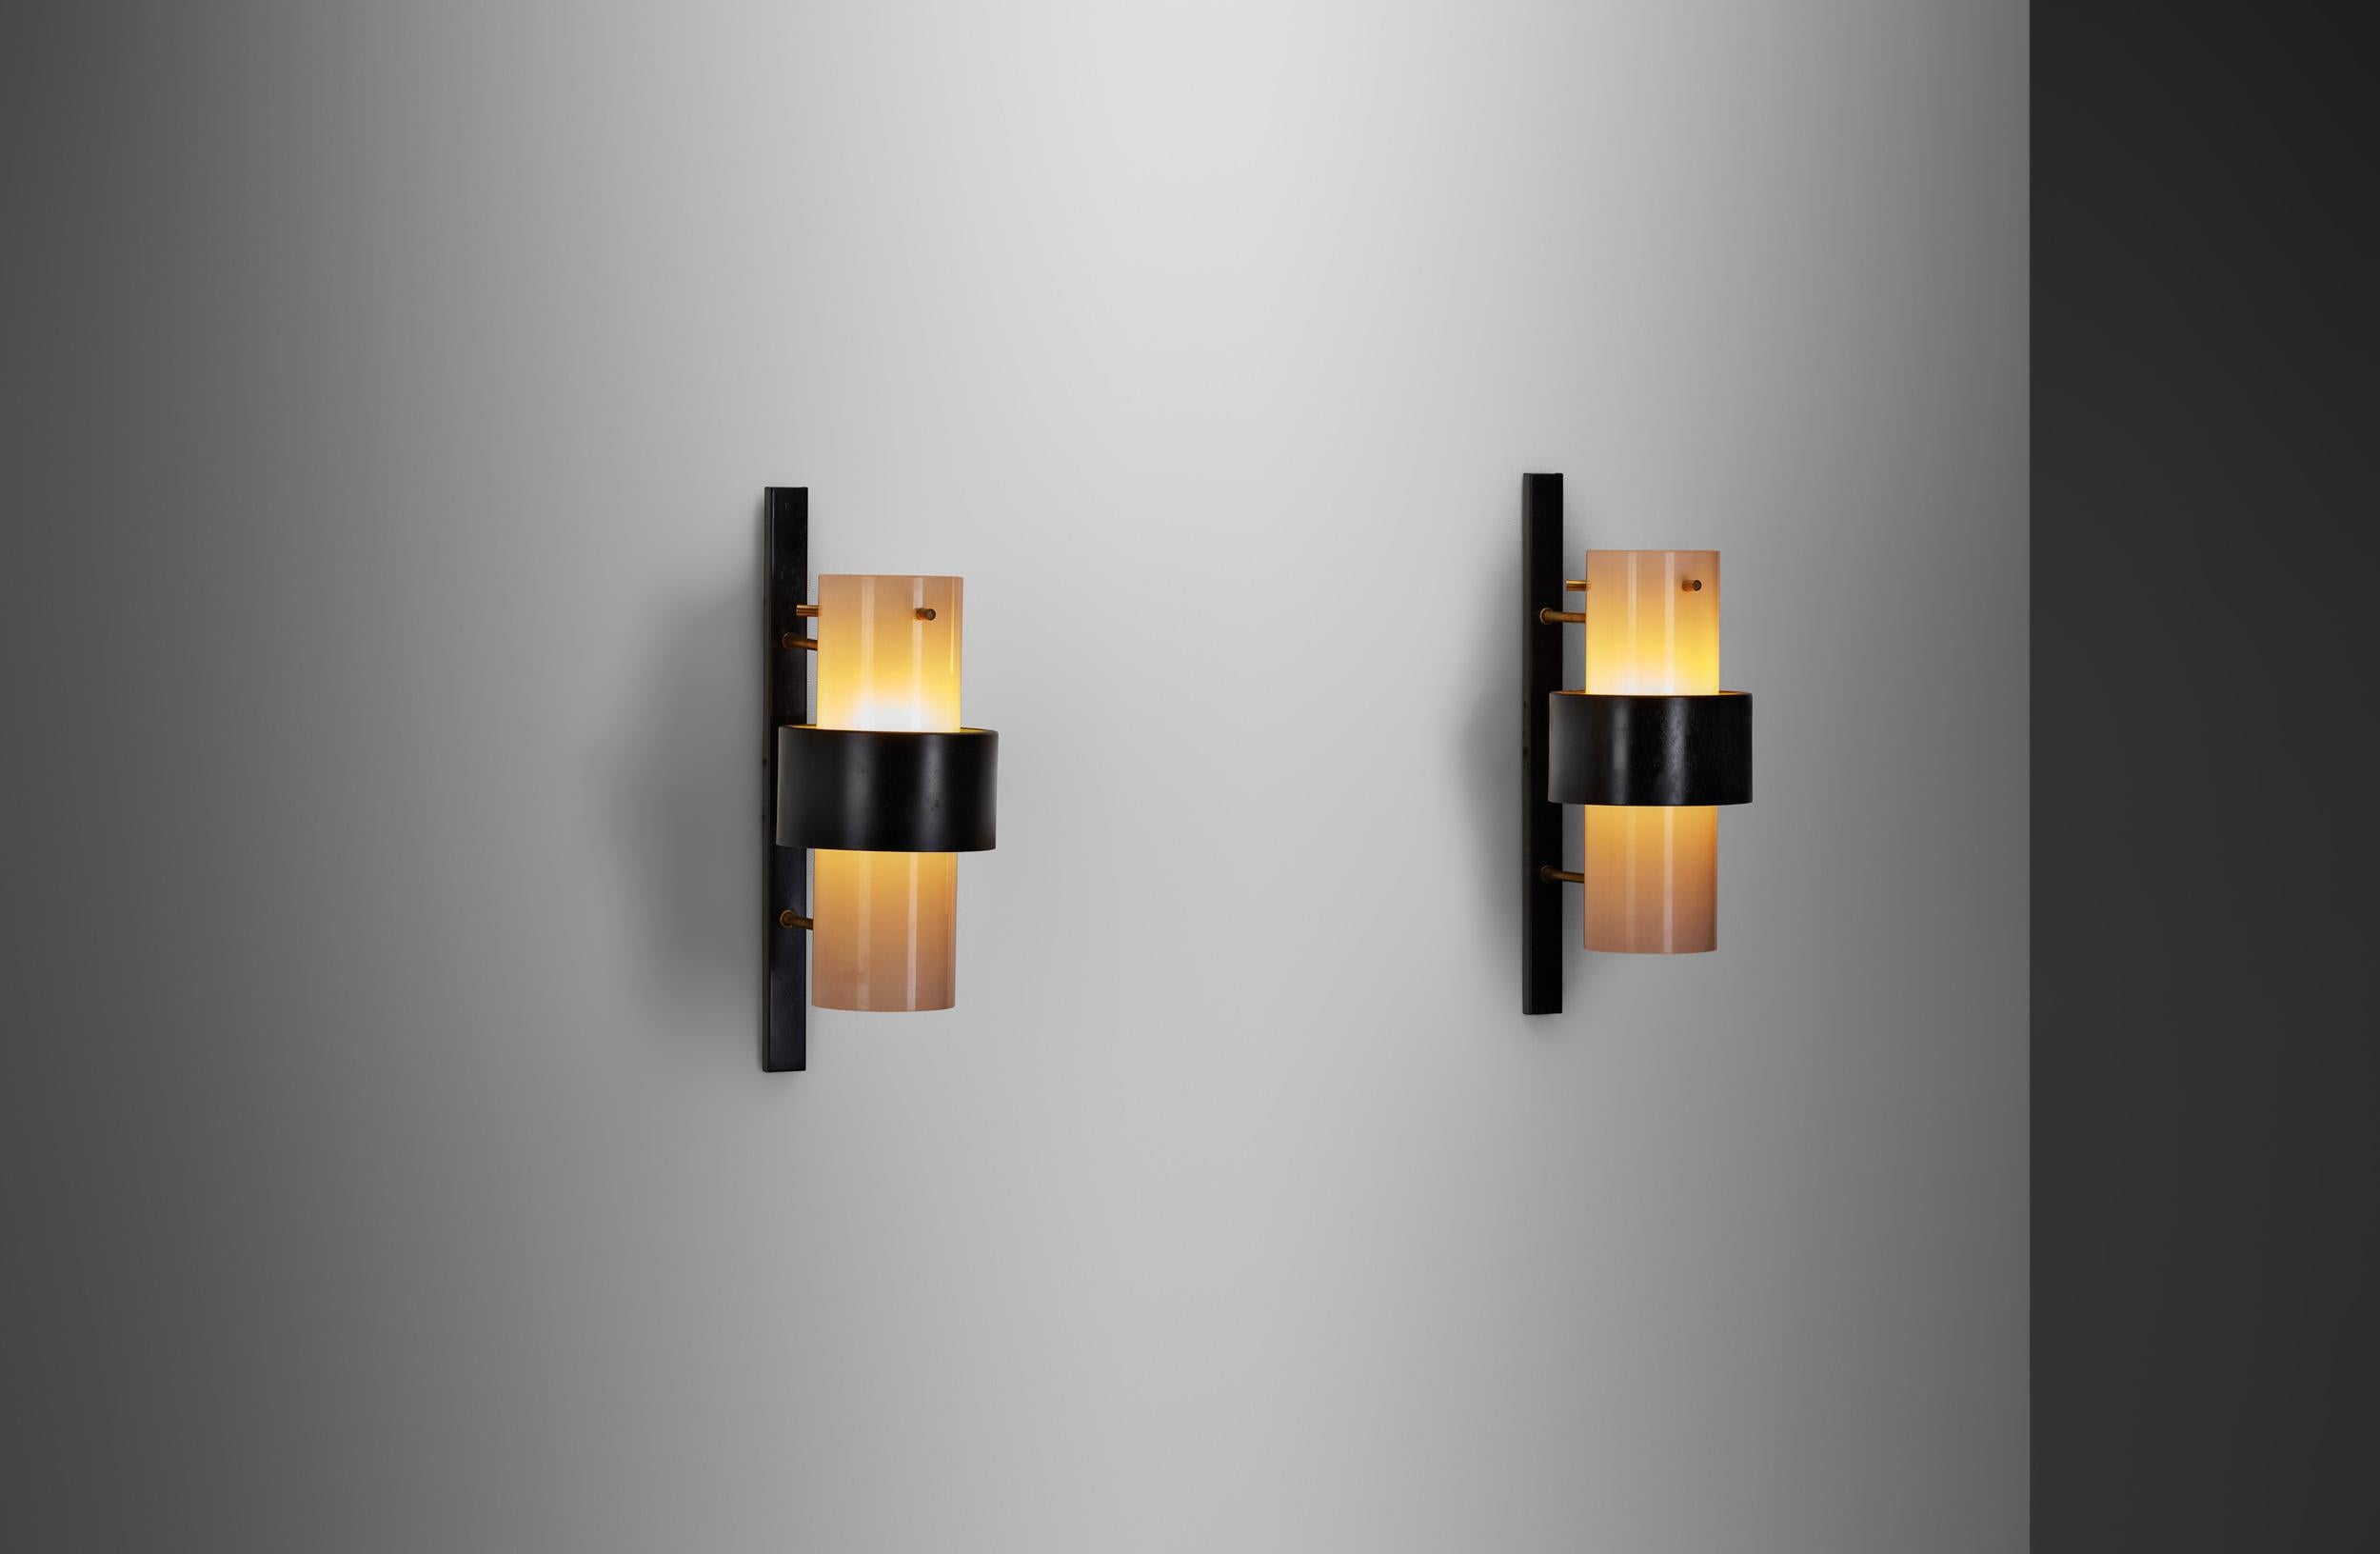 Mid-20th Century Pair of Acrylic Glass Wall Sconces by Maison Lunel, France 1950s For Sale